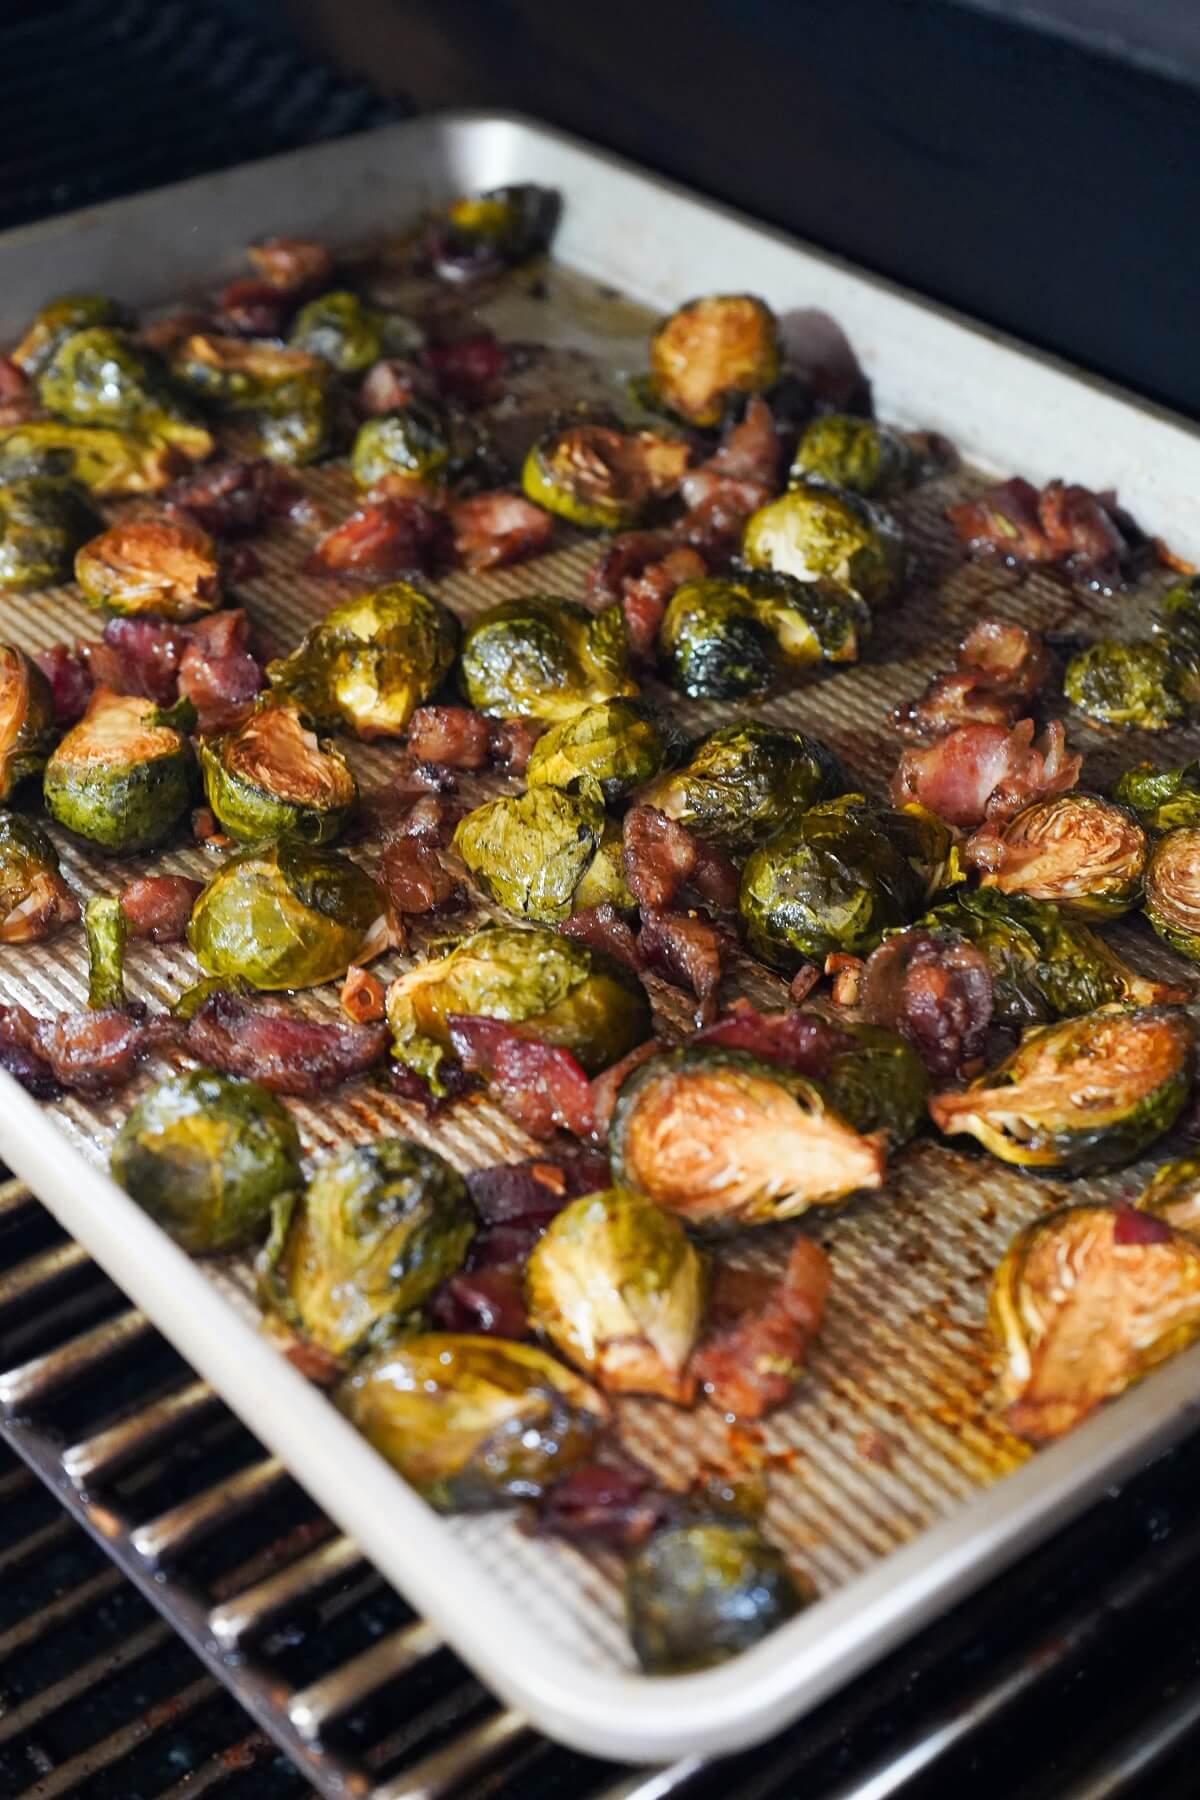 tray of roasted brussels sprouts on grill.